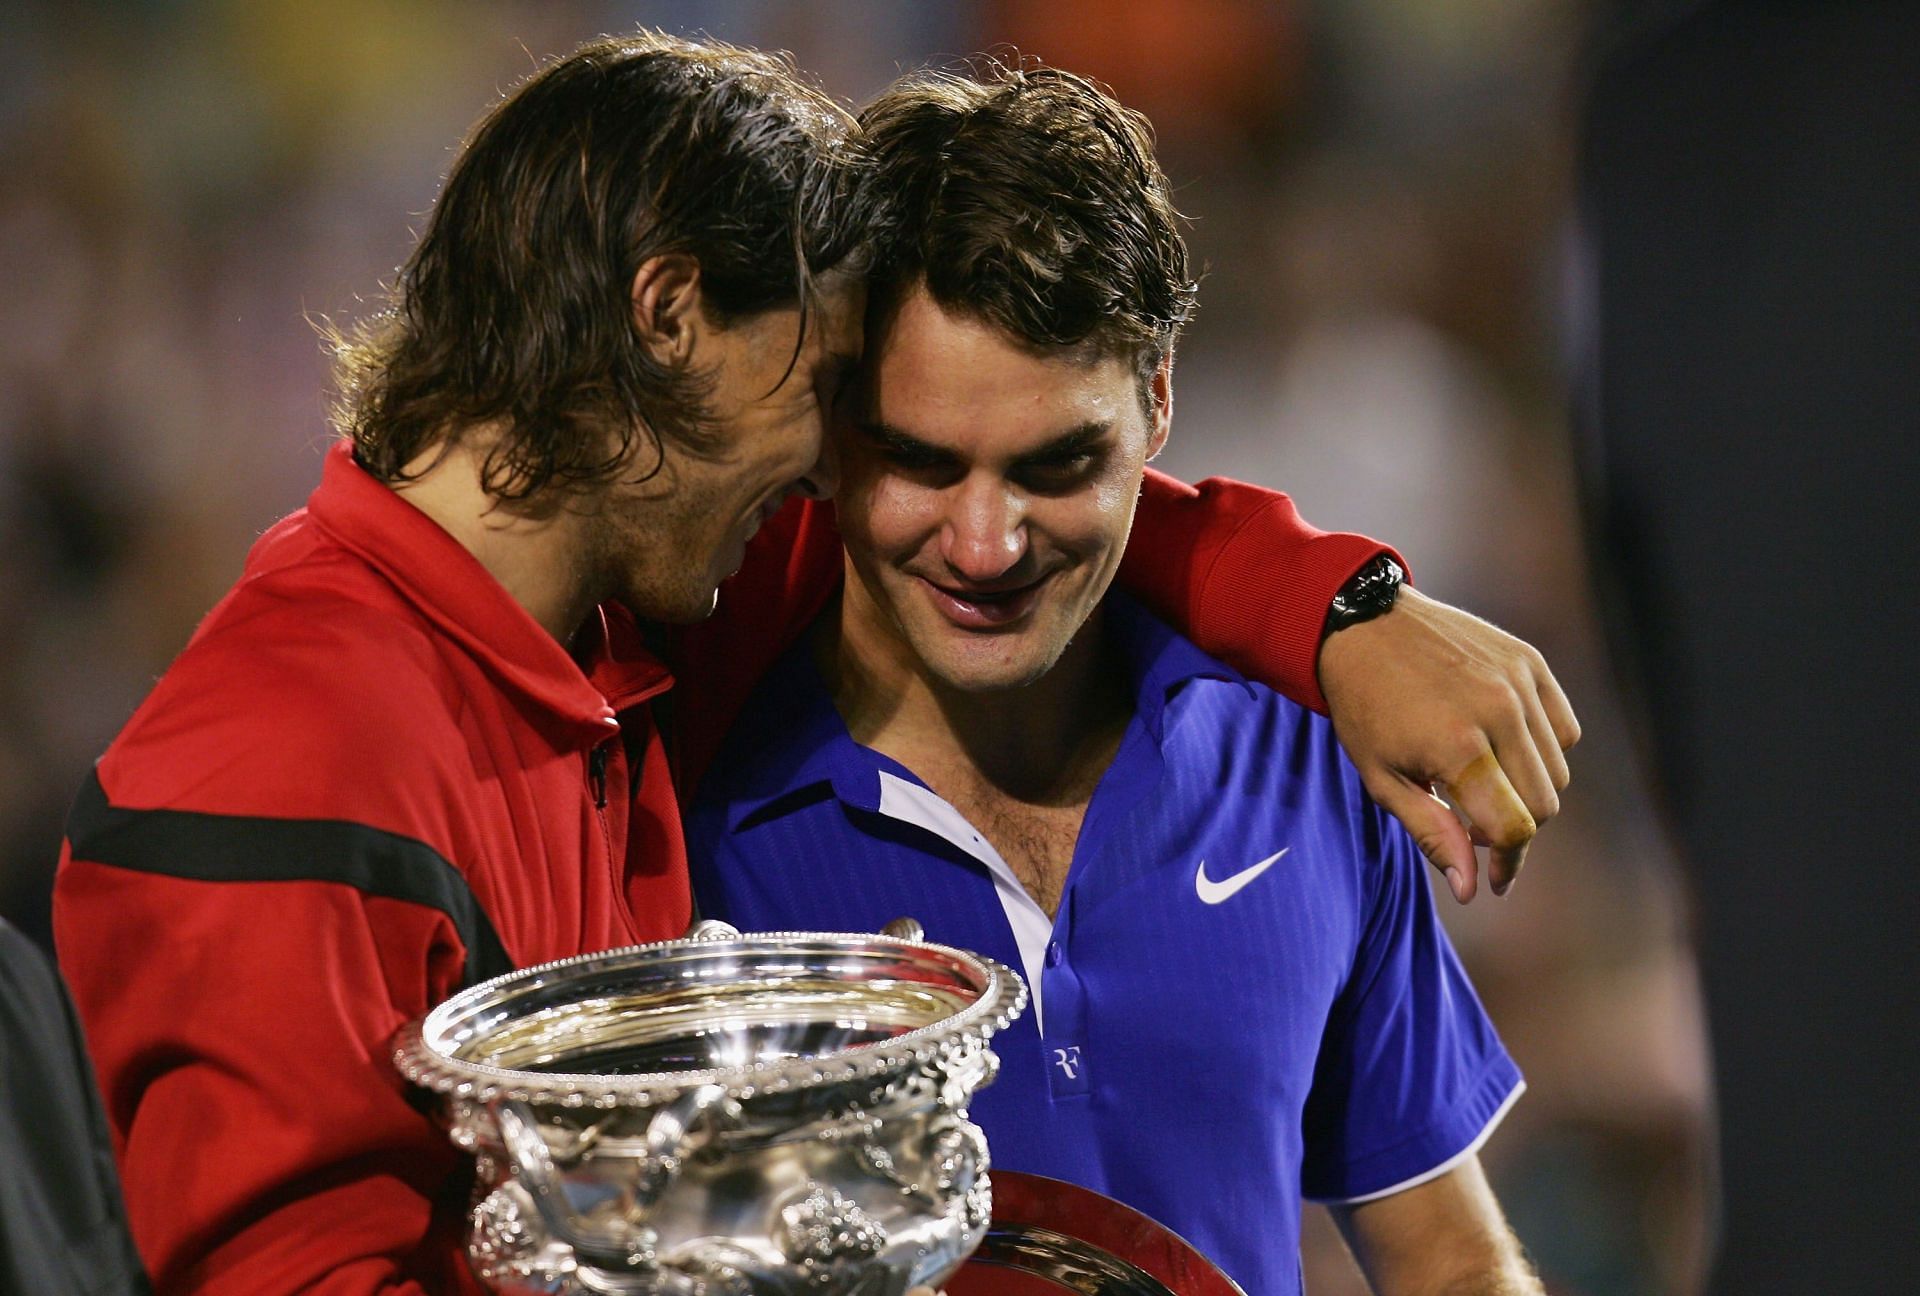 Rafael Nadal won his maiden Australian Open title by beating Federer in an epic final